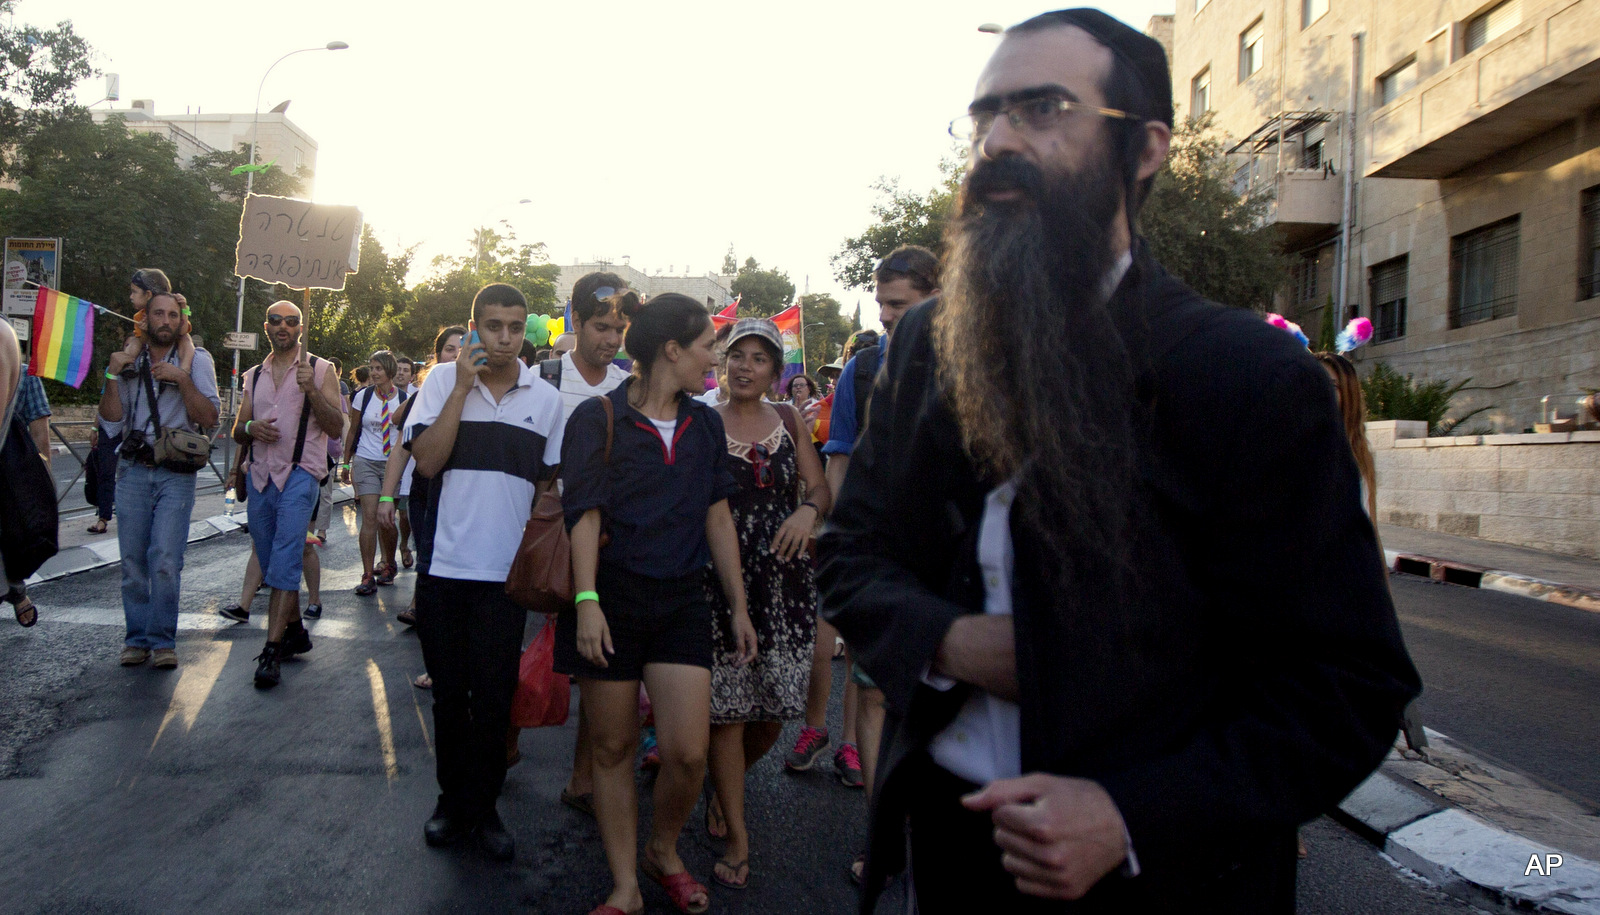 Ultra-Orthodox Jew Yishai Schlissel walks through a Gay Pride parade and is just about to pull a knife from under his coat and start stabbing people in Jerusalem, Thursday, July 30, 2015. Schlissel was recently released from prison after serving a term for stabbing several people at a gay pride parade in 2005, a police spokeswoman said.